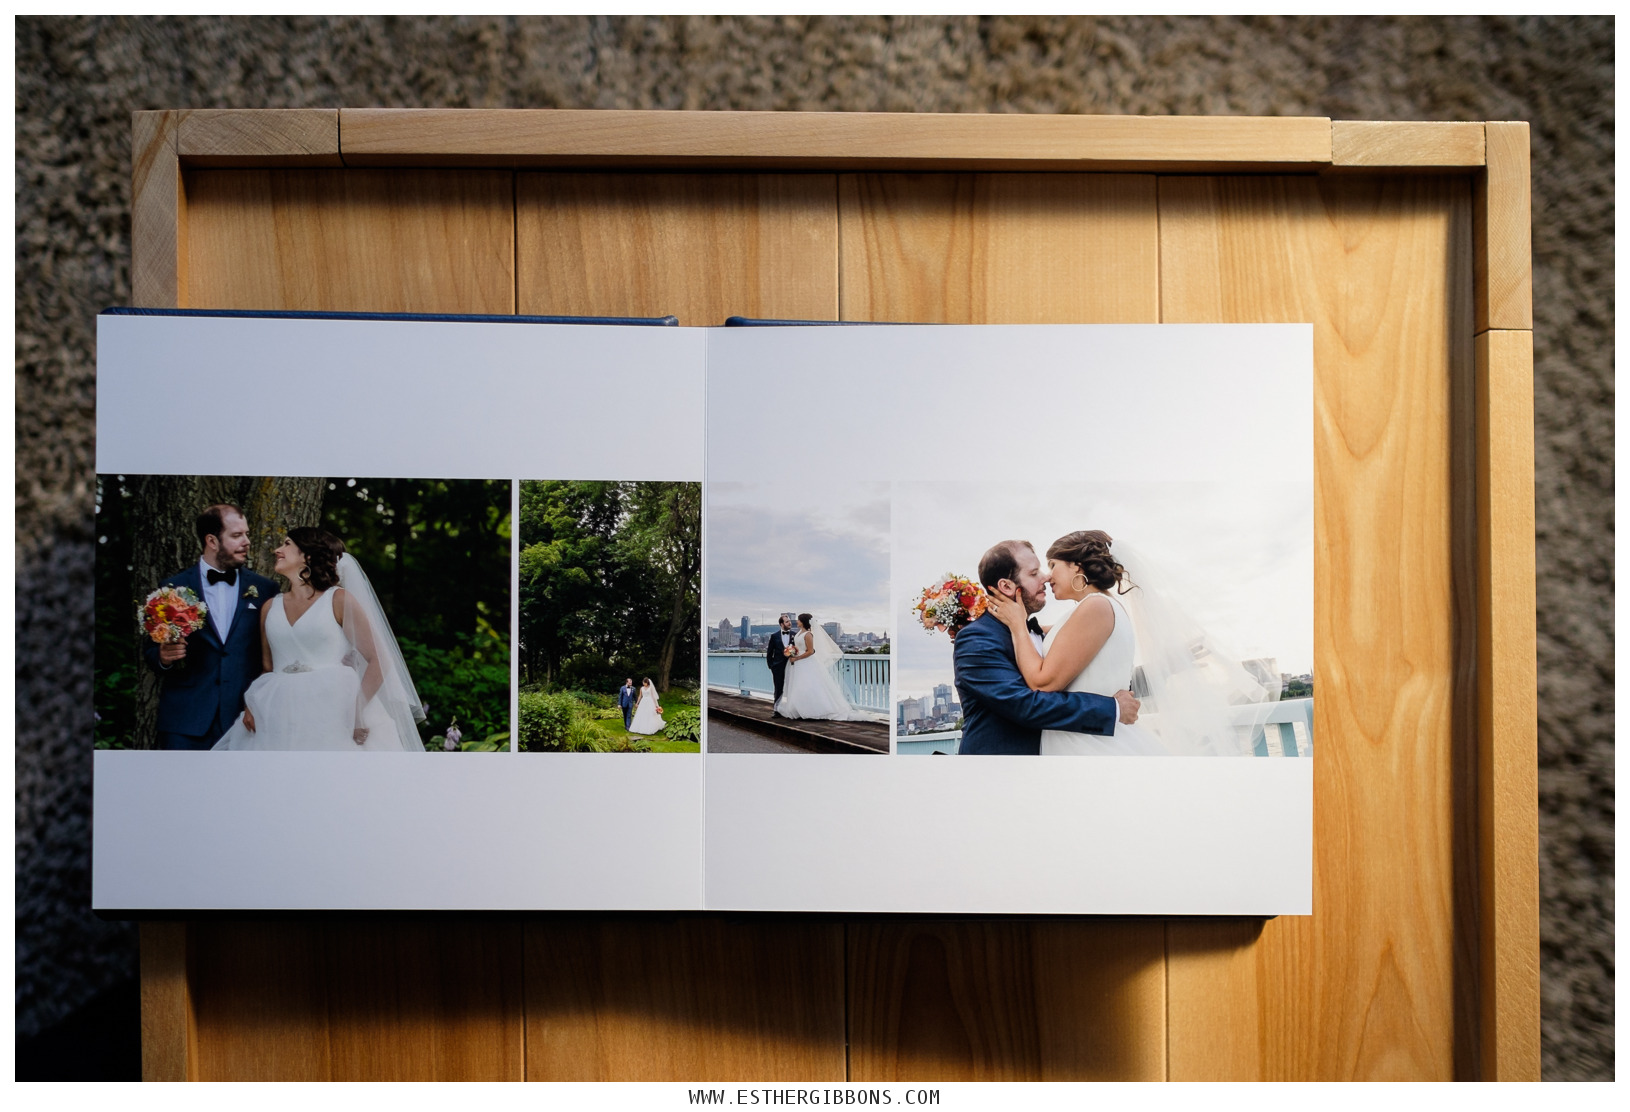 A simple minimalist spread design for showcasing the bride and groom portraits